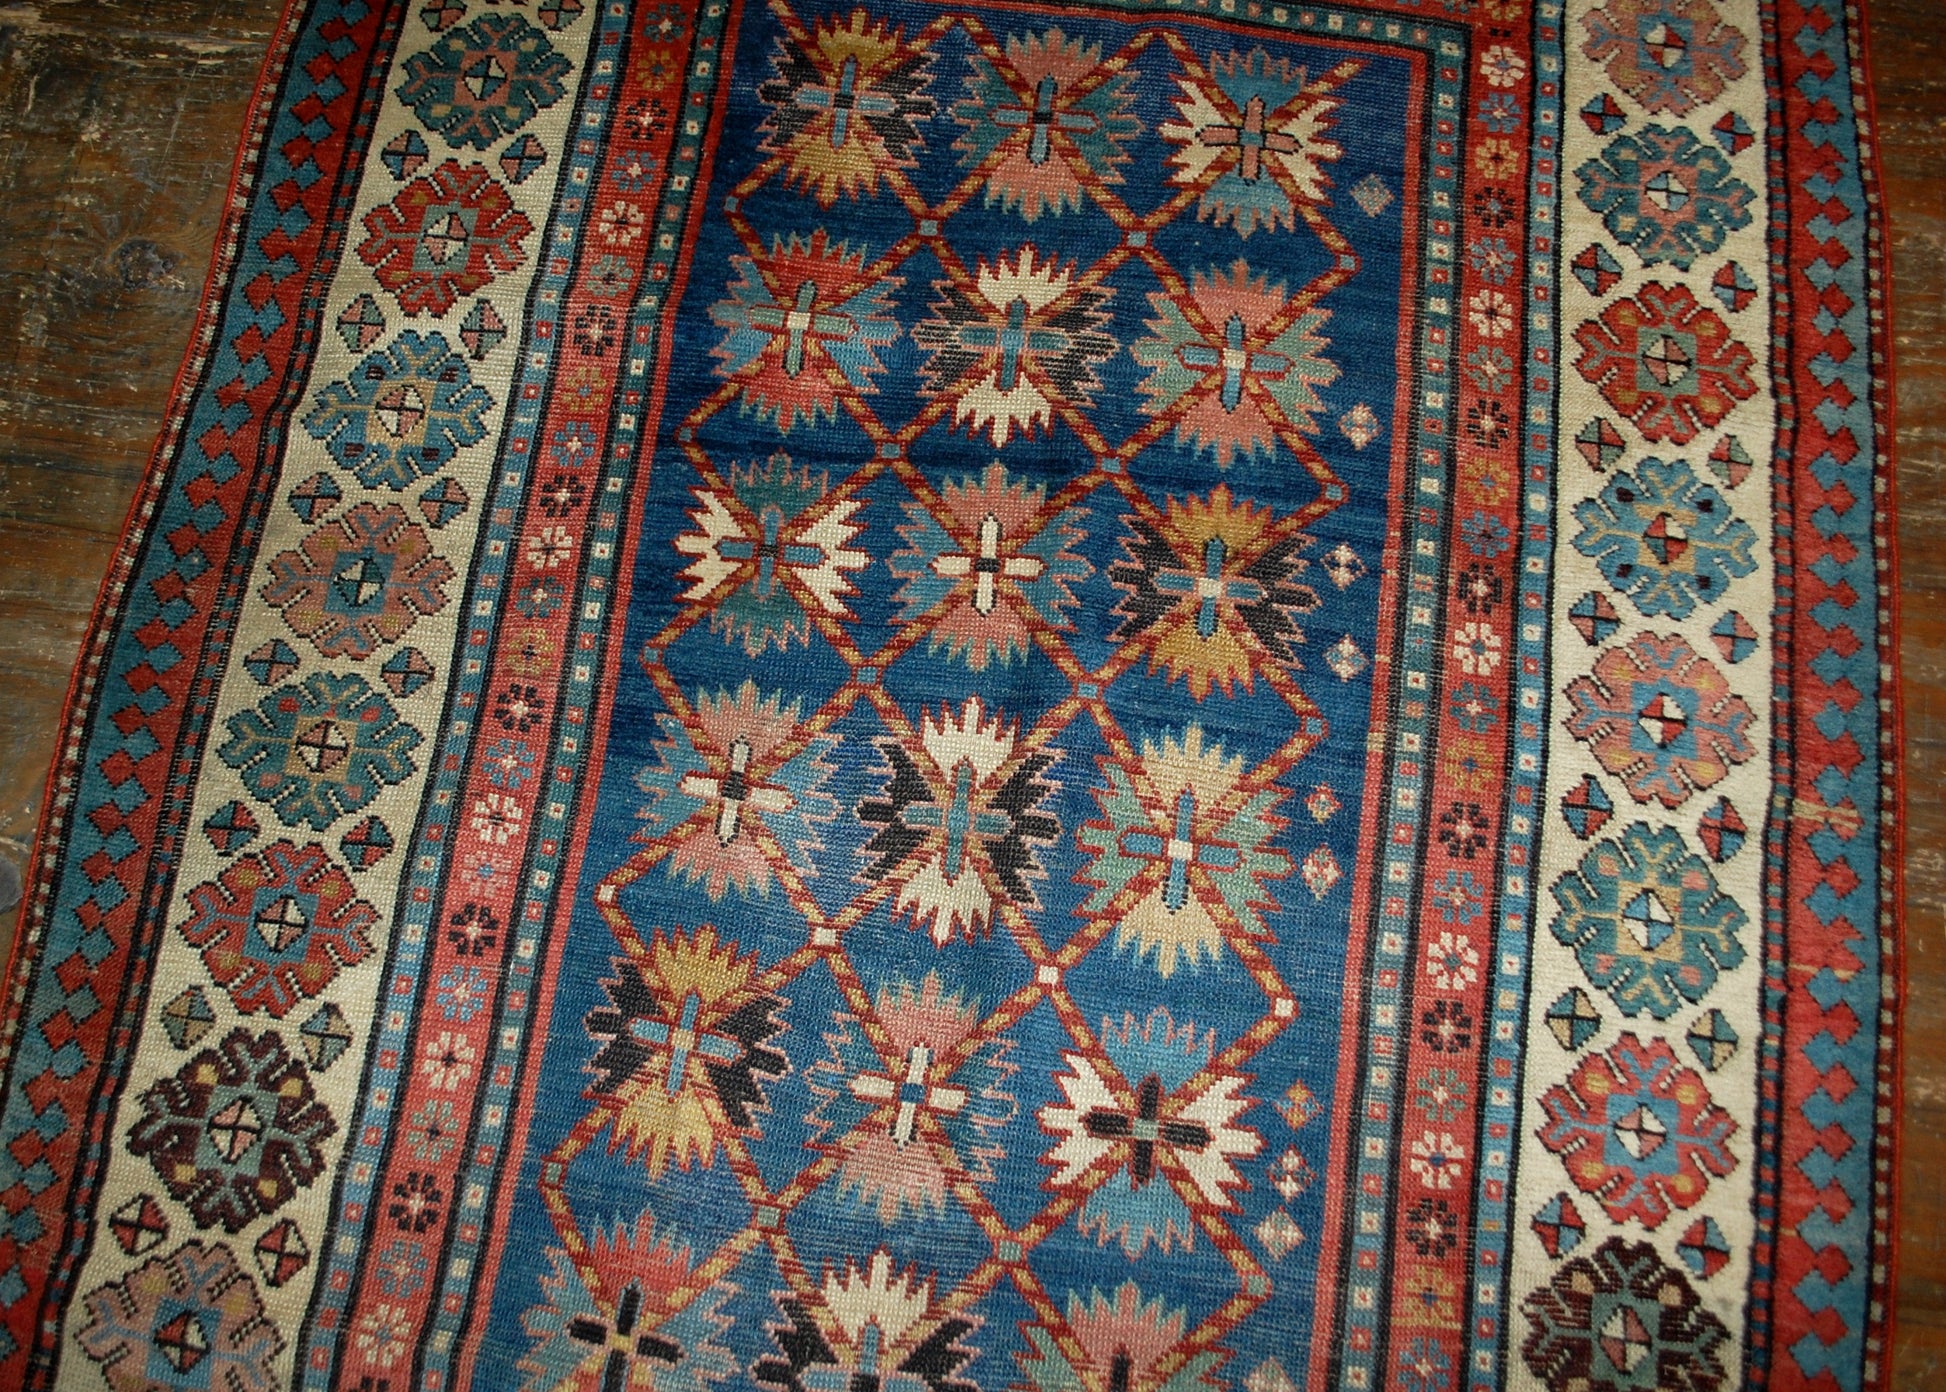 Antique handmade Caucasian Talish rug in good condition. The rug is in blue and white shades, made in the end of 19th century in Russia.